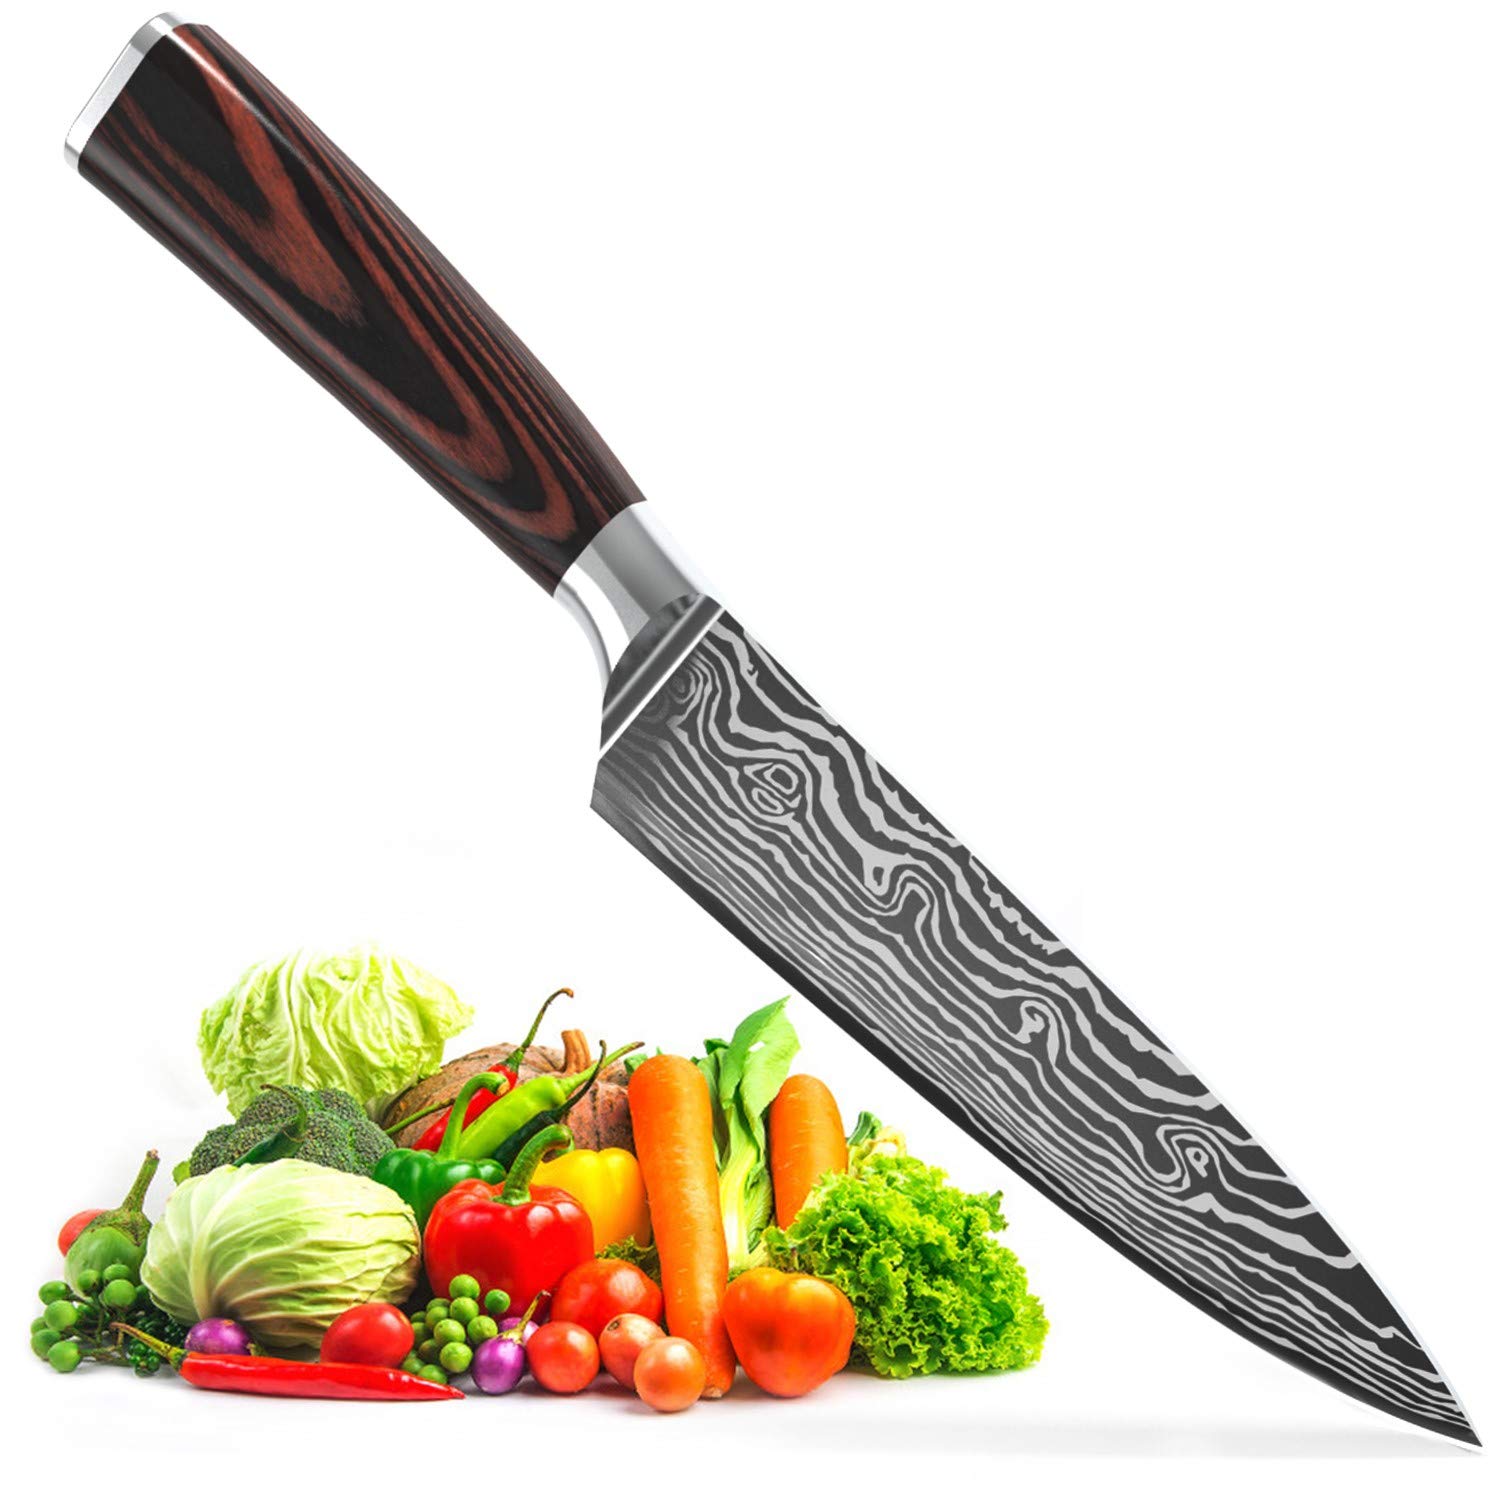 HolaFolks chef Knife, Anti-Rust Oil coating Kitchen cooking Knife Dividing Knife Boning Knife Hand Forged High carbon Steel Butc